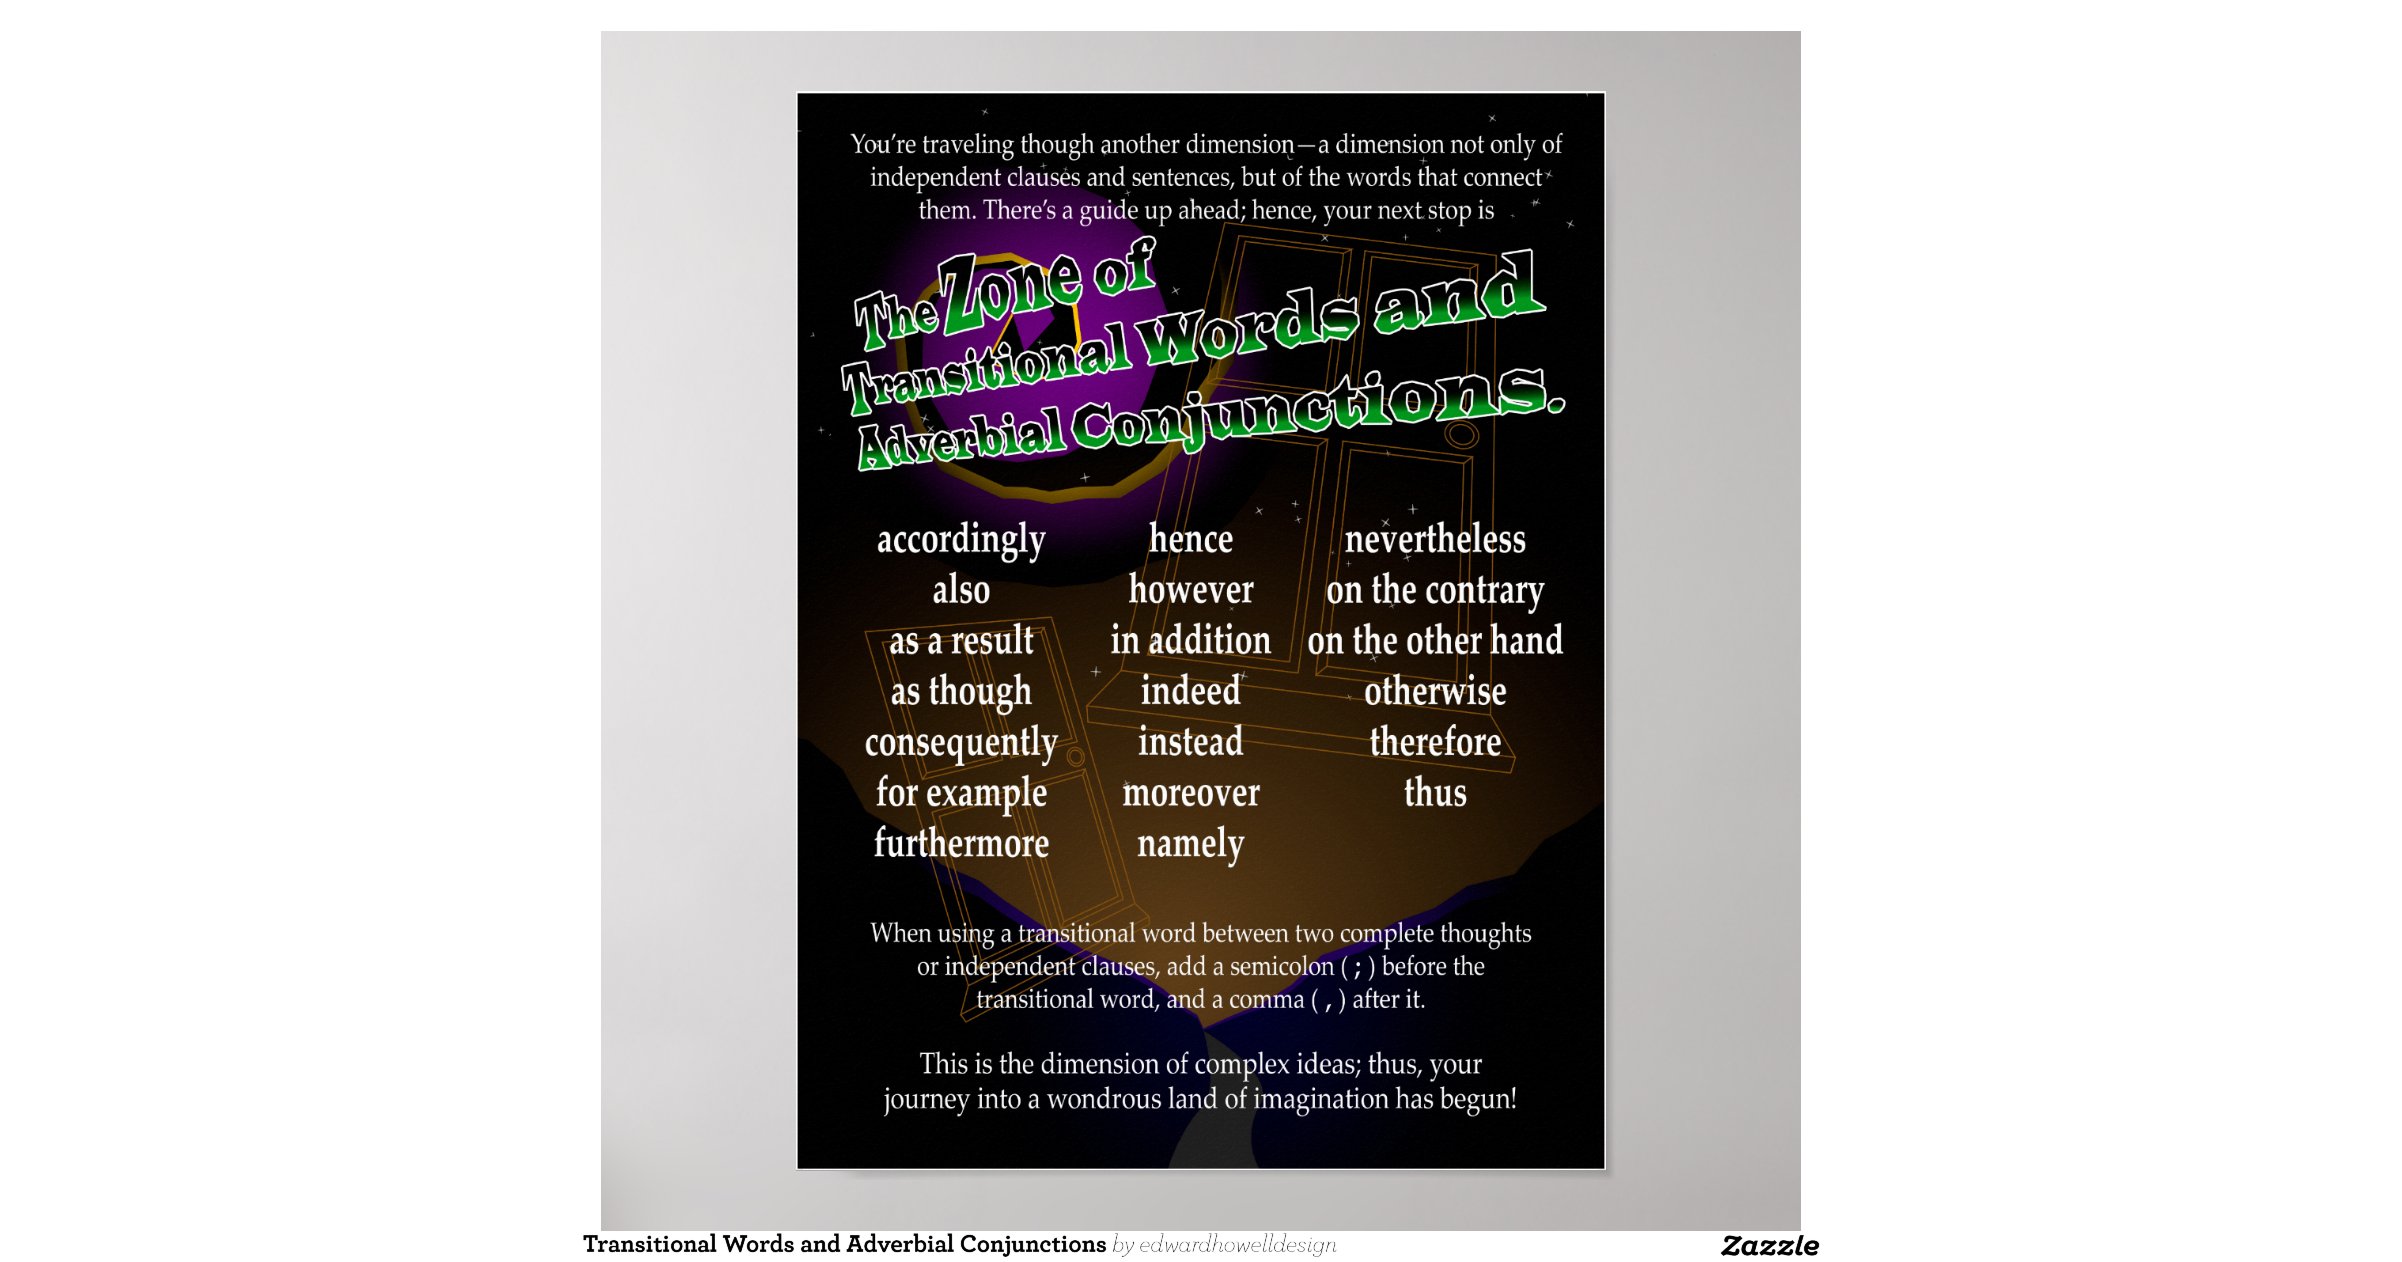 transitional-words-and-adverbial-conjunctions-poster-r492f107da2b944839584d91bdc63f827-i5m-8byvr